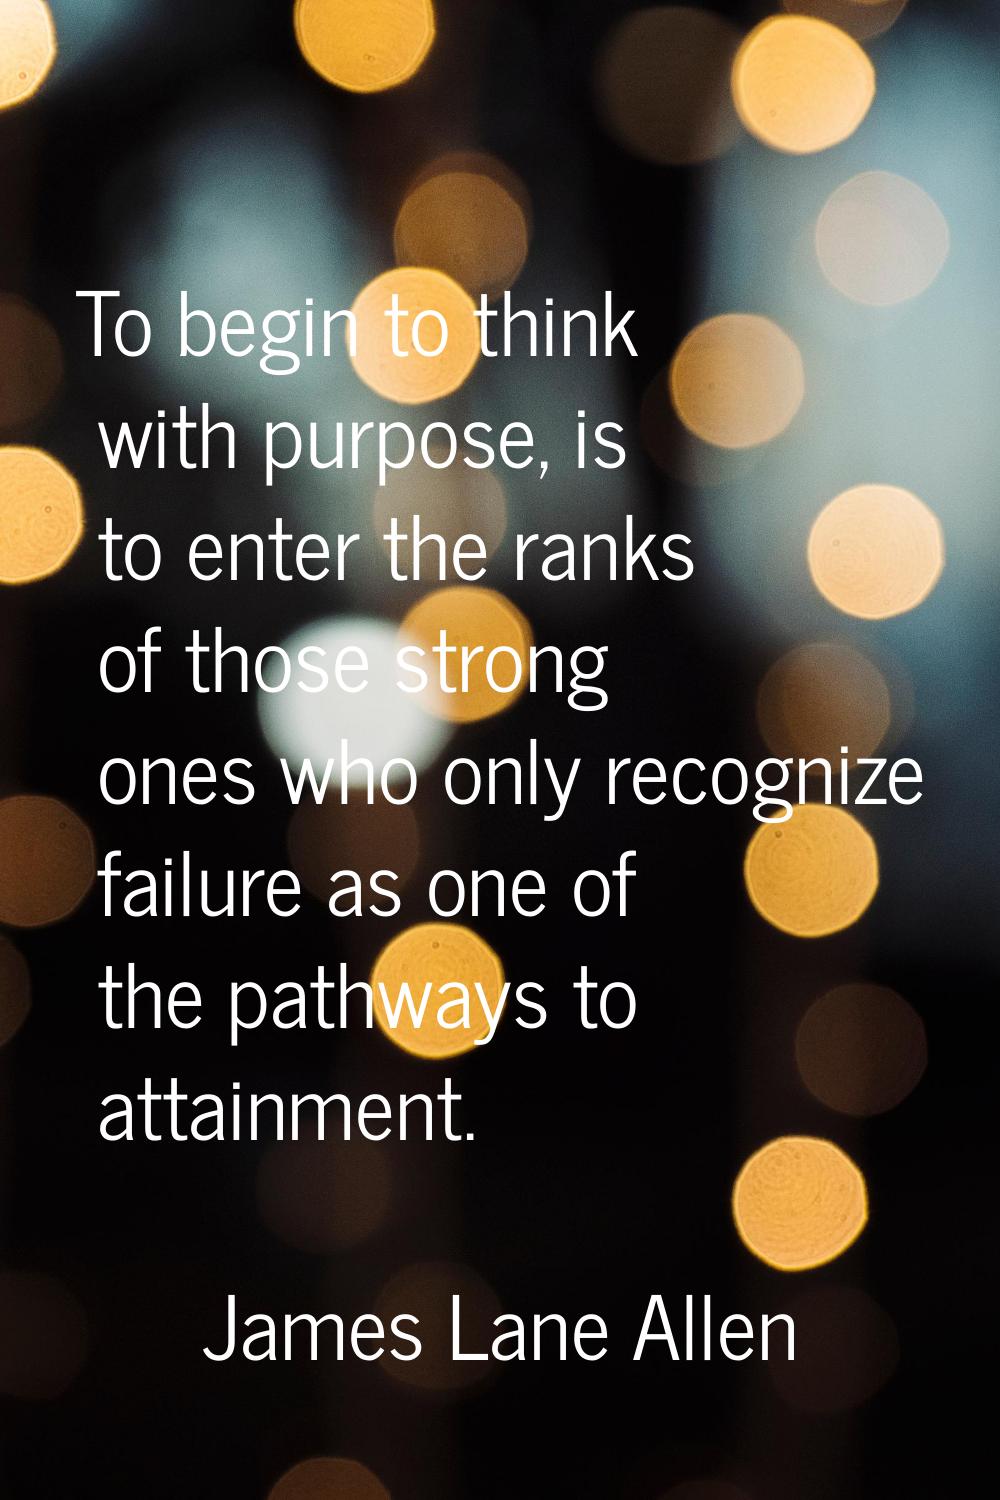 To begin to think with purpose, is to enter the ranks of those strong ones who only recognize failu